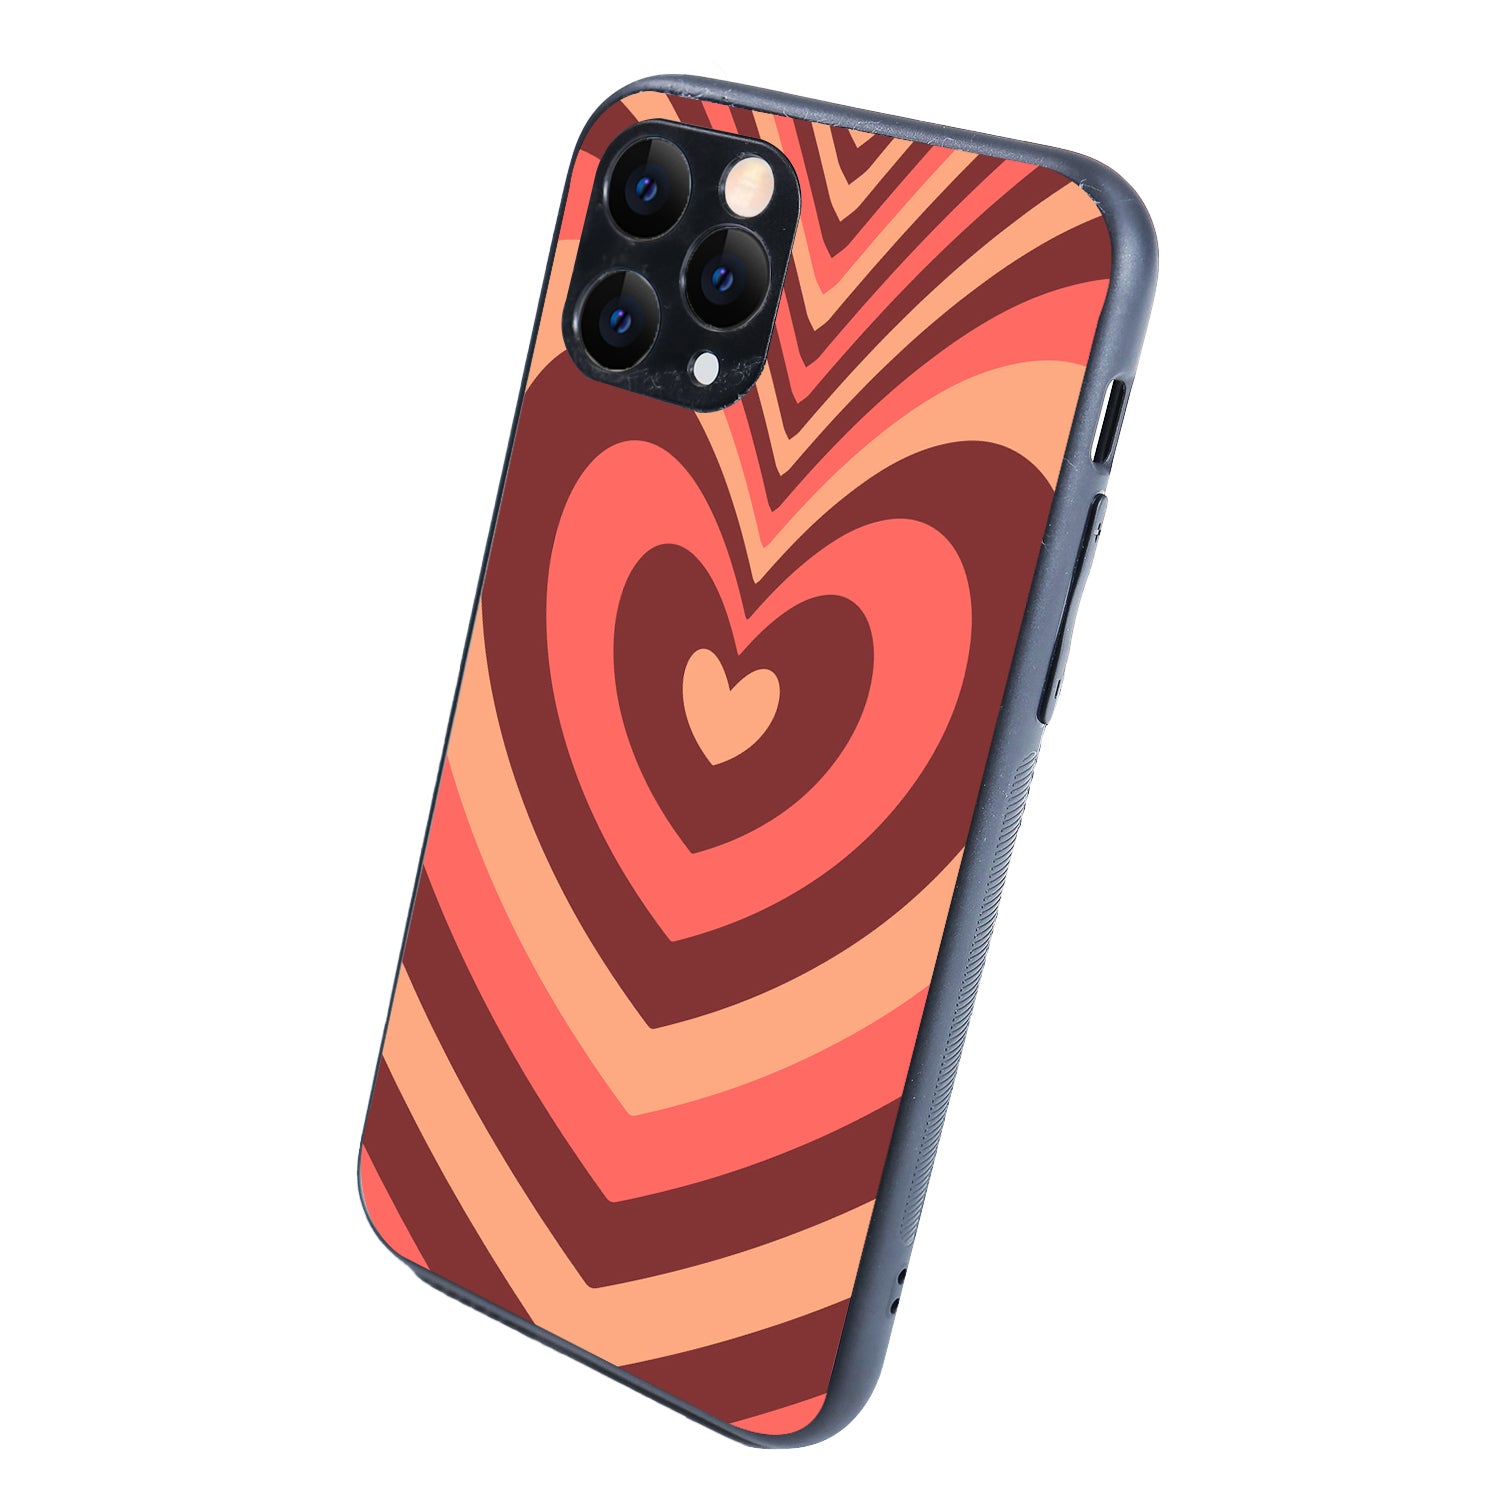 Red Heart Optical Illusion iPhone 11 Pro Case